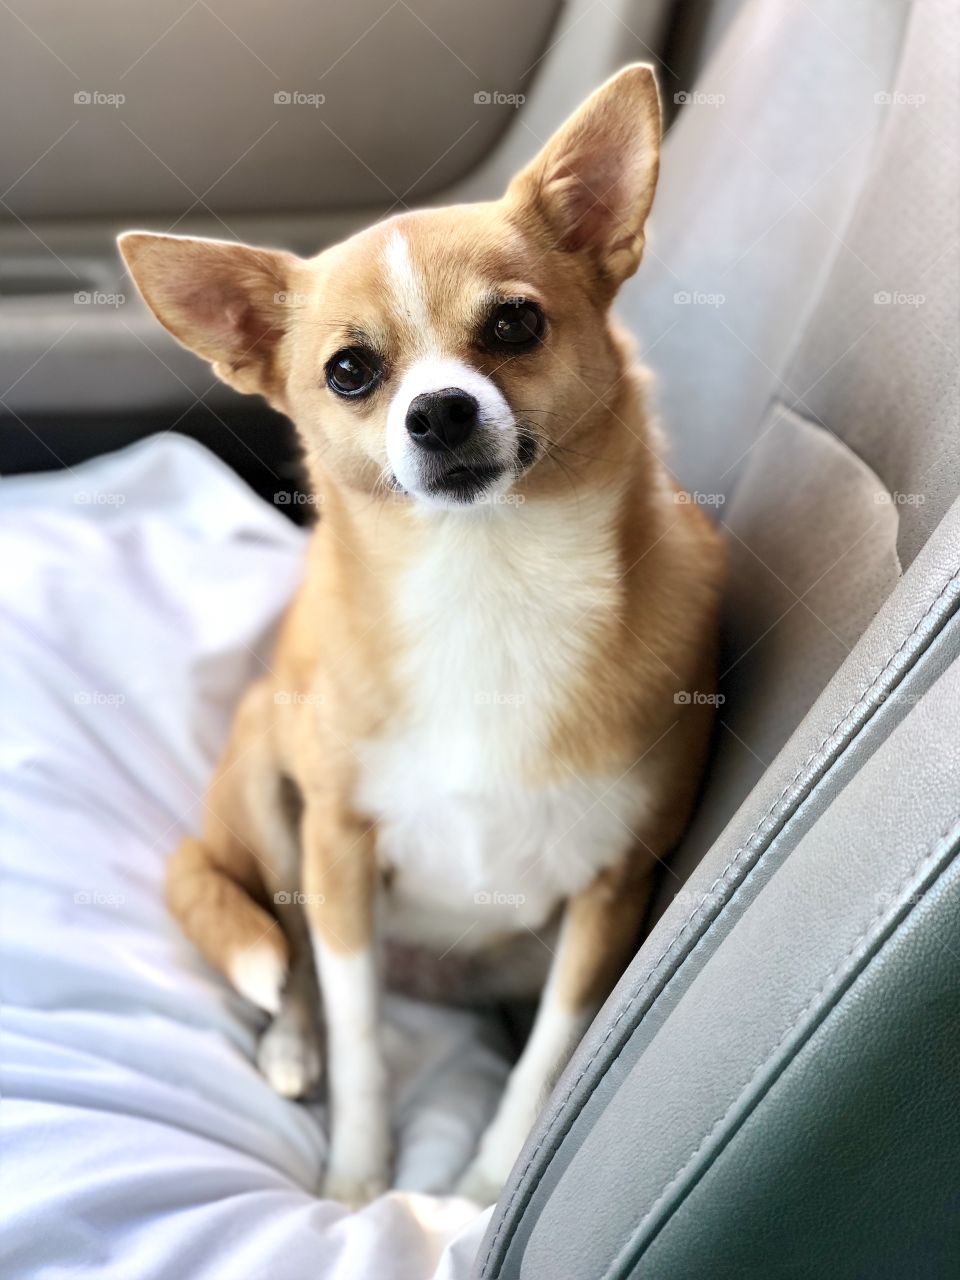 Relaxing in her favorite spot on her comfy pillow in the car for a chilly fall morning ride.